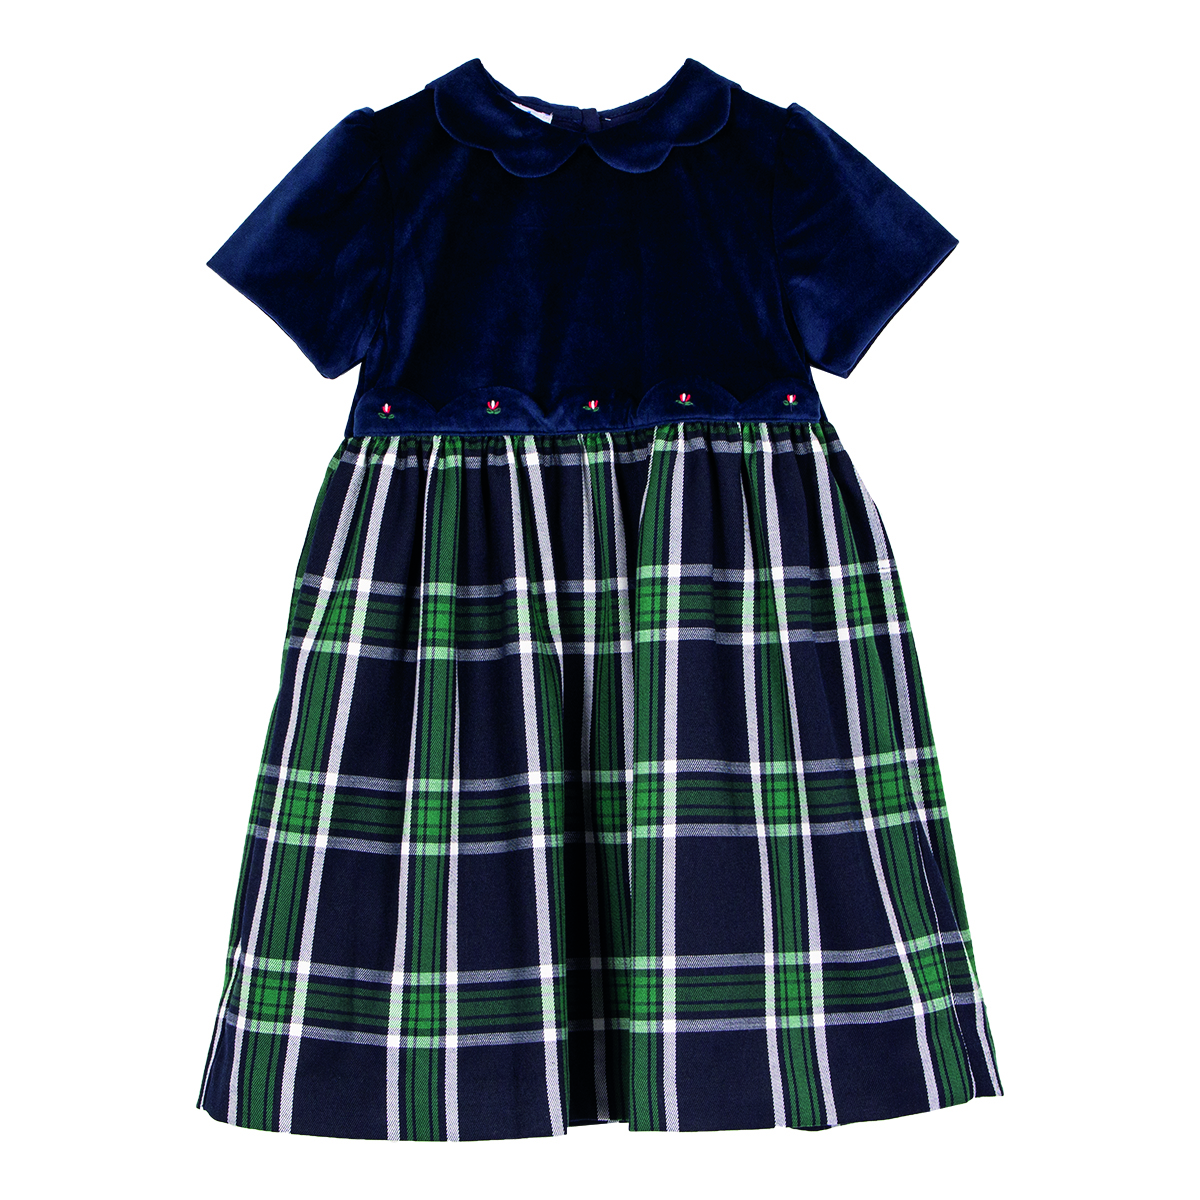 Siola Babies' Dress With Checked Skirt In Blu